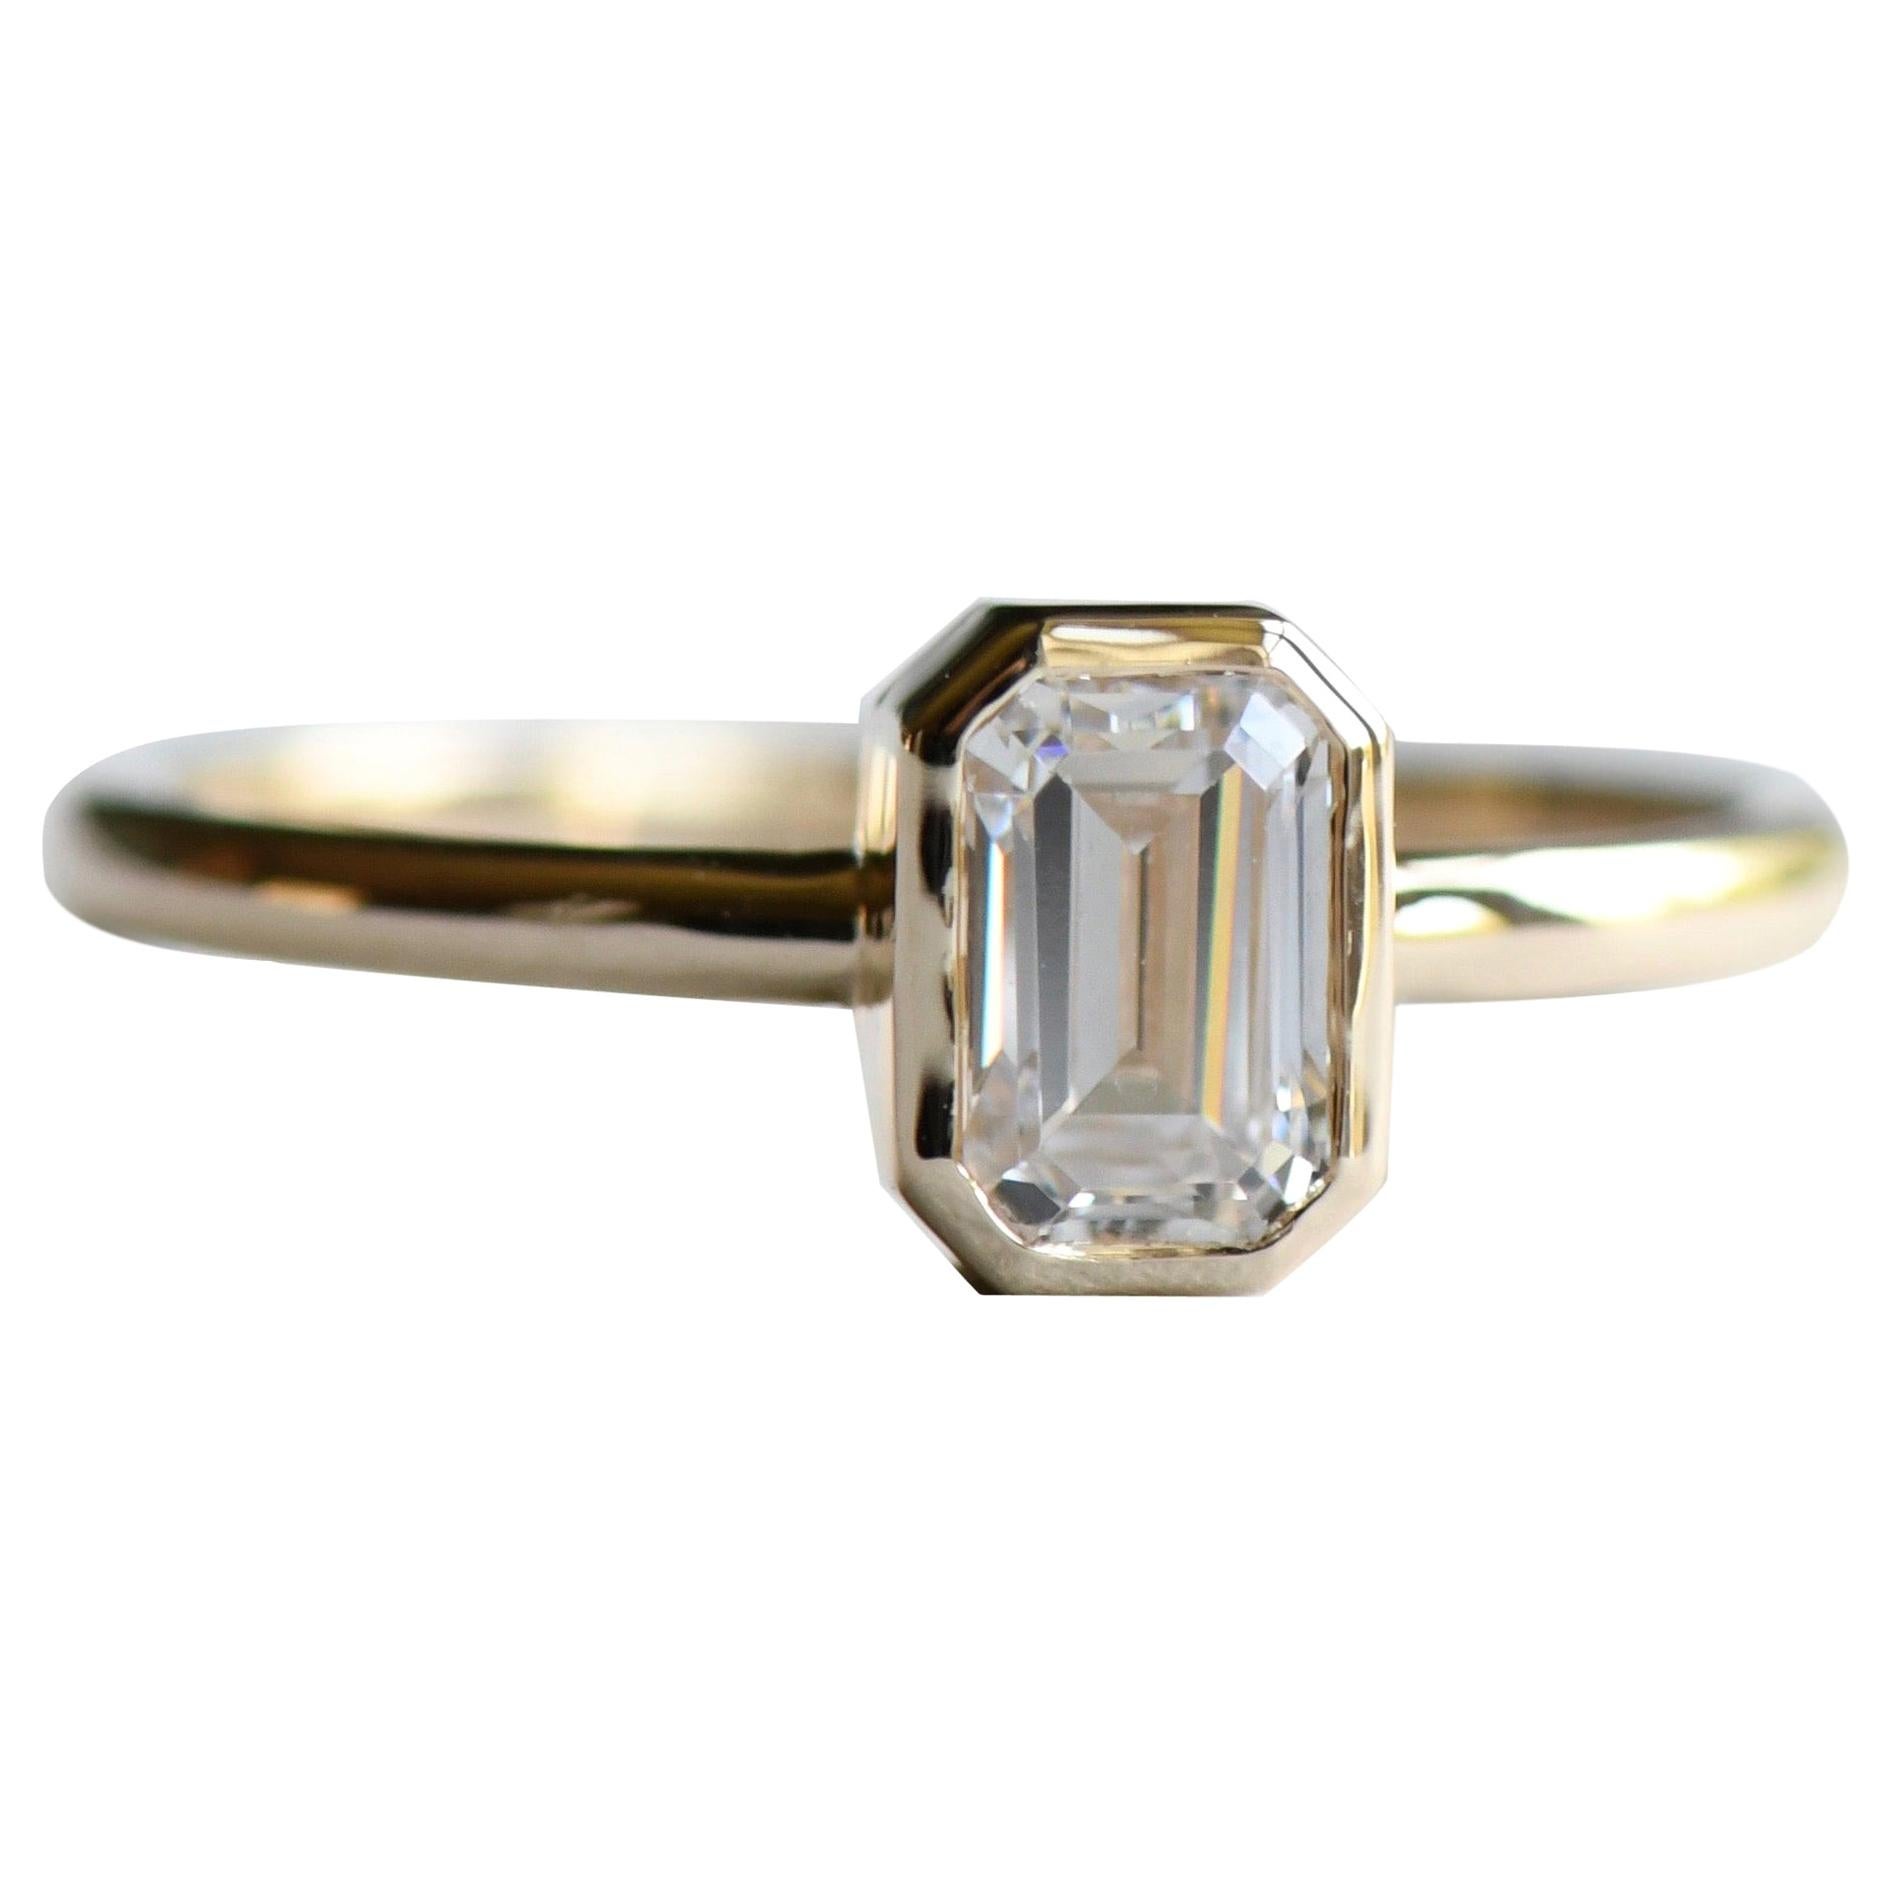 For Sale:  14 Karat Gold with 0.5 Carat Emerald Cut Diamond Solitaire Ring, Engagement Ring